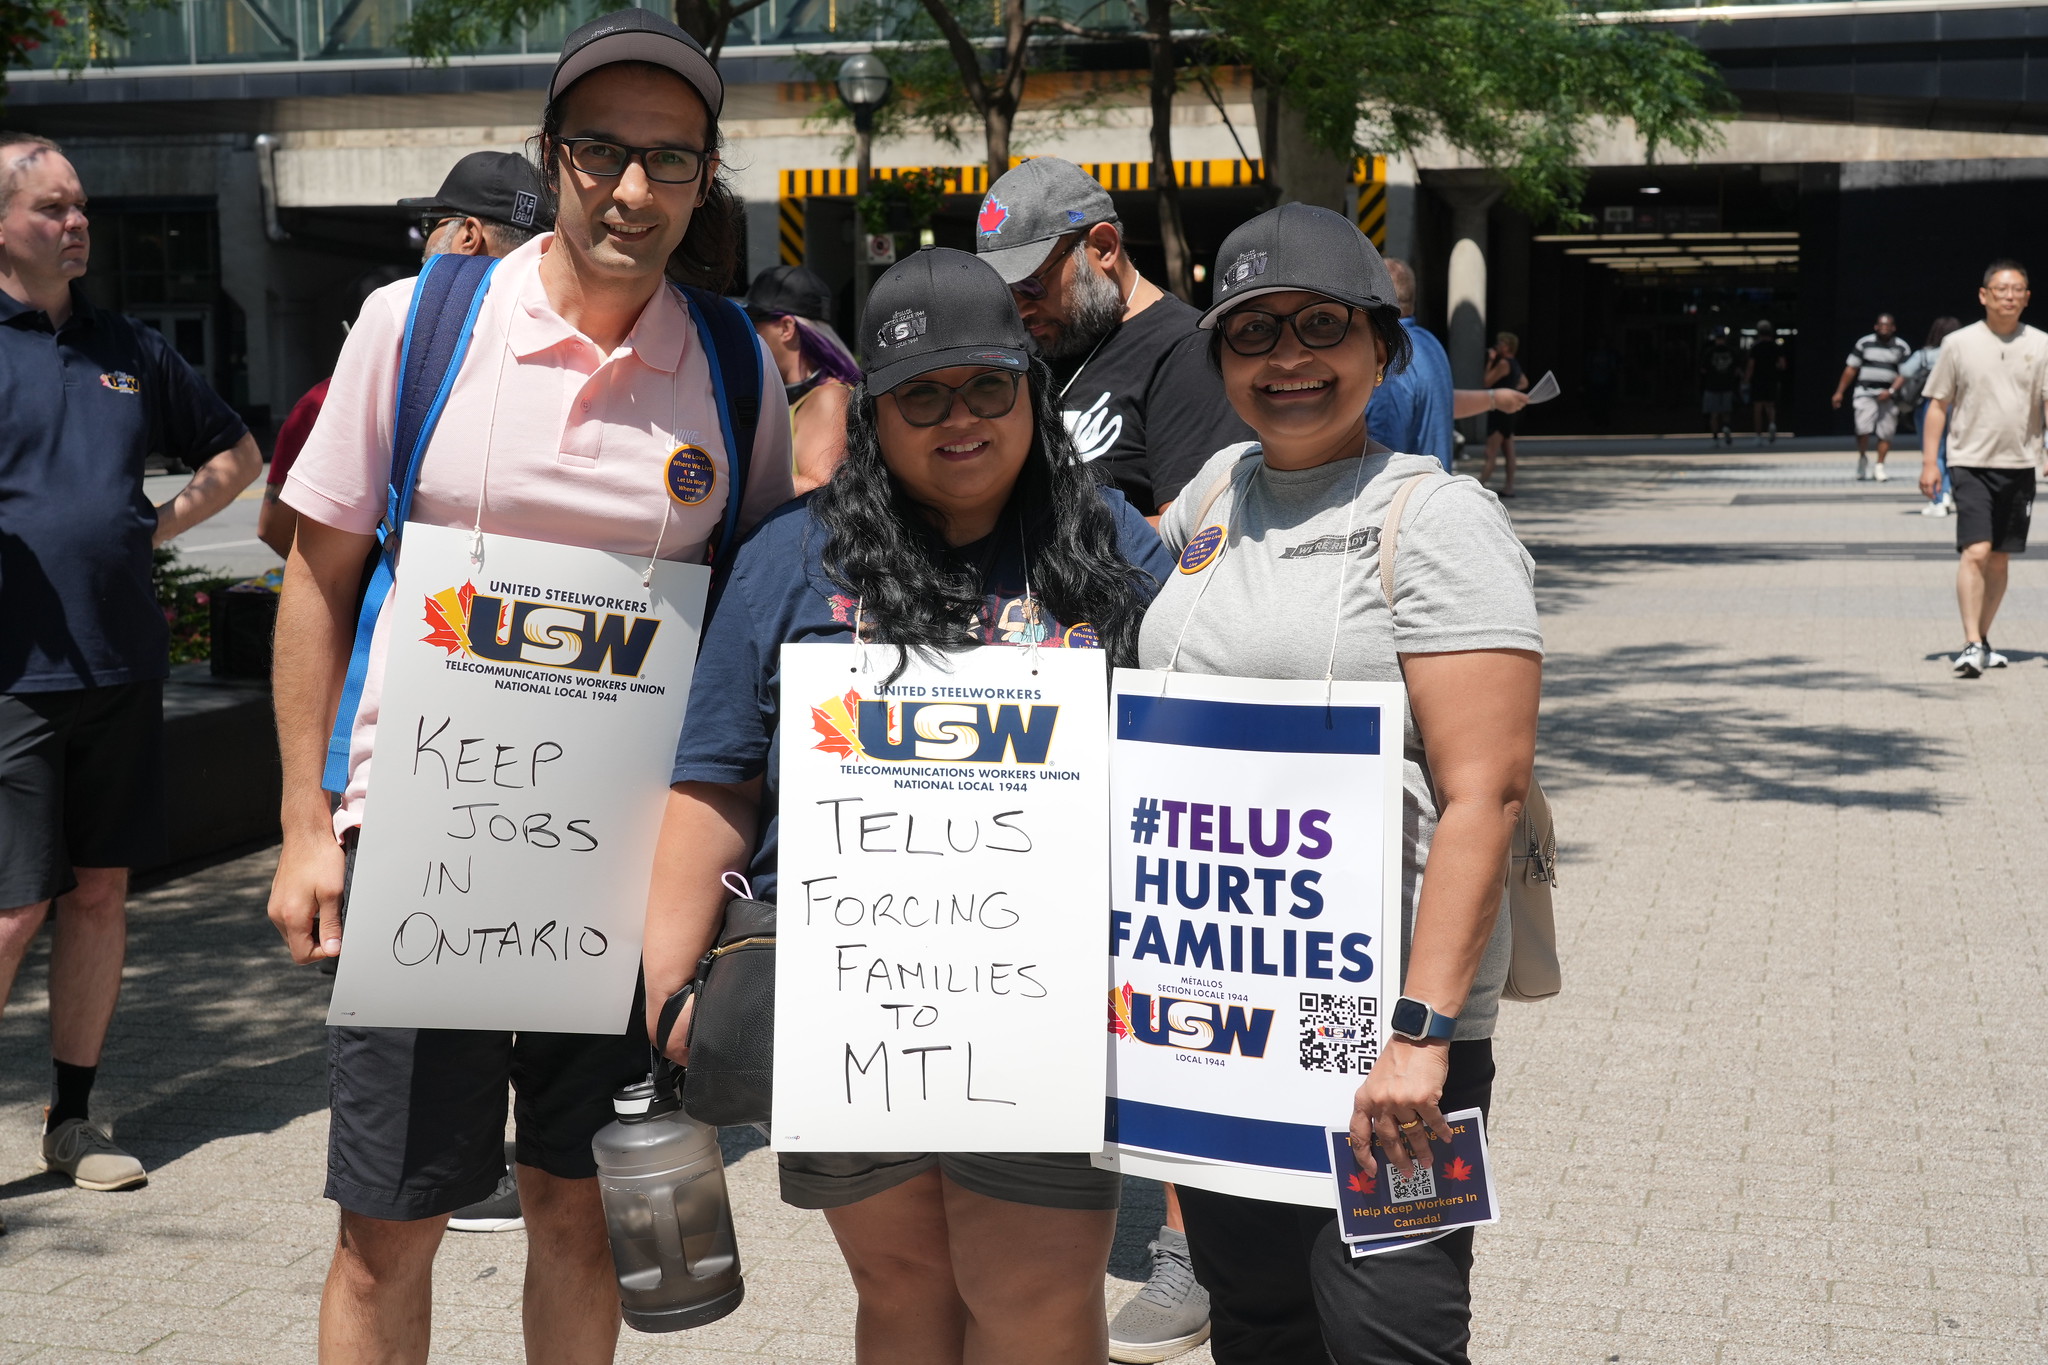 Image: three people stand outdoors on a sunny day wearing placards: "#Telus hurts families" and "Keep jobs in Ontario."